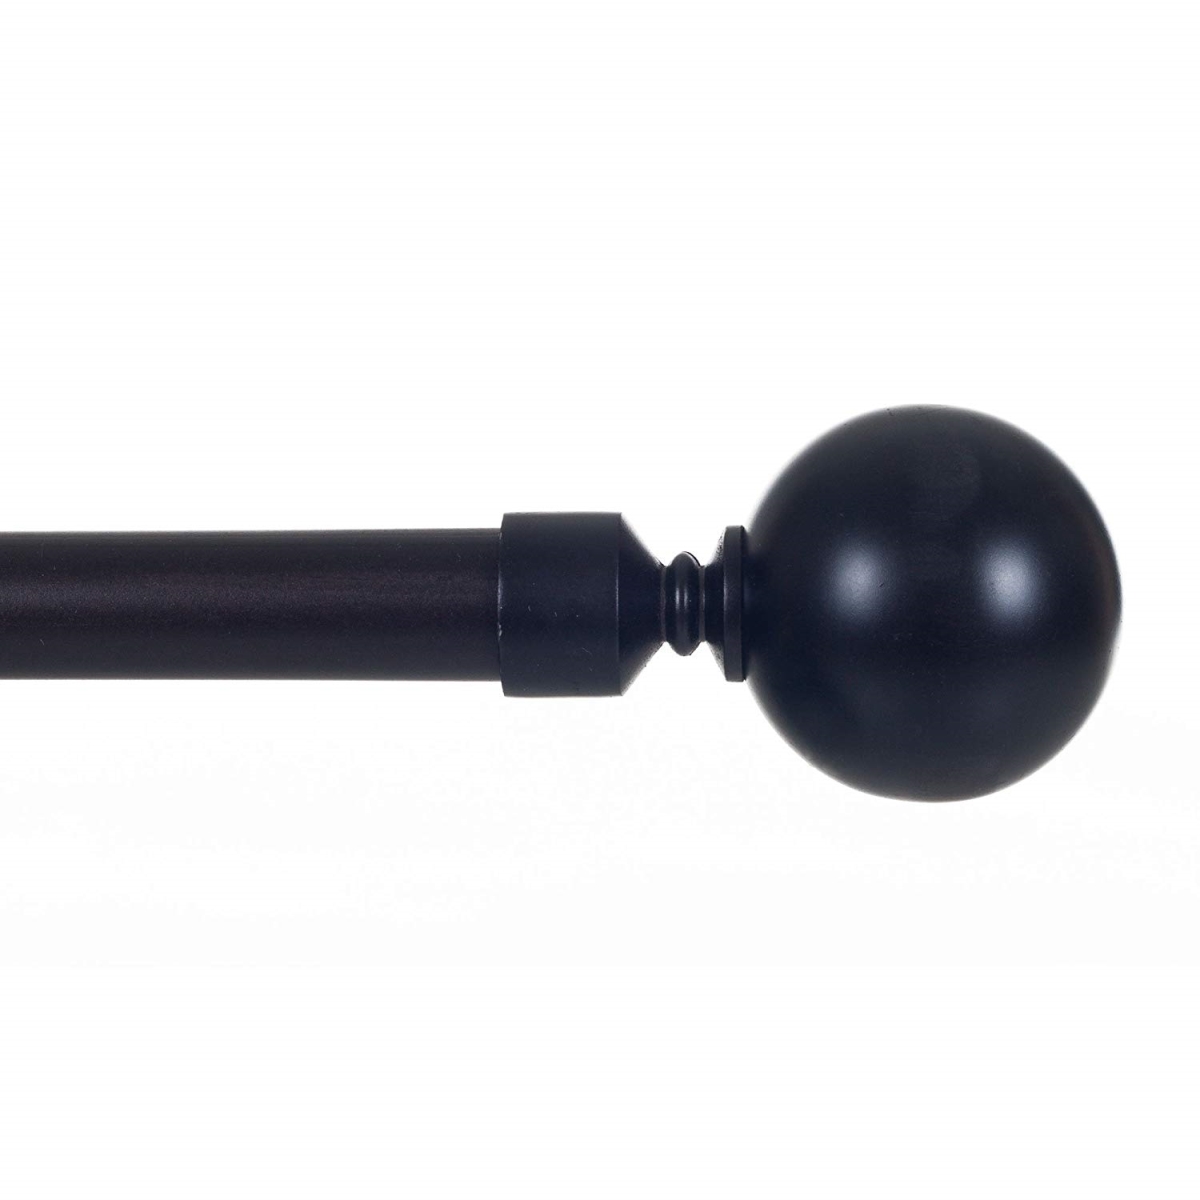 63a-19448 Sphere Curtain Rod For Window, Rubbed Bronze - 0.75 In.